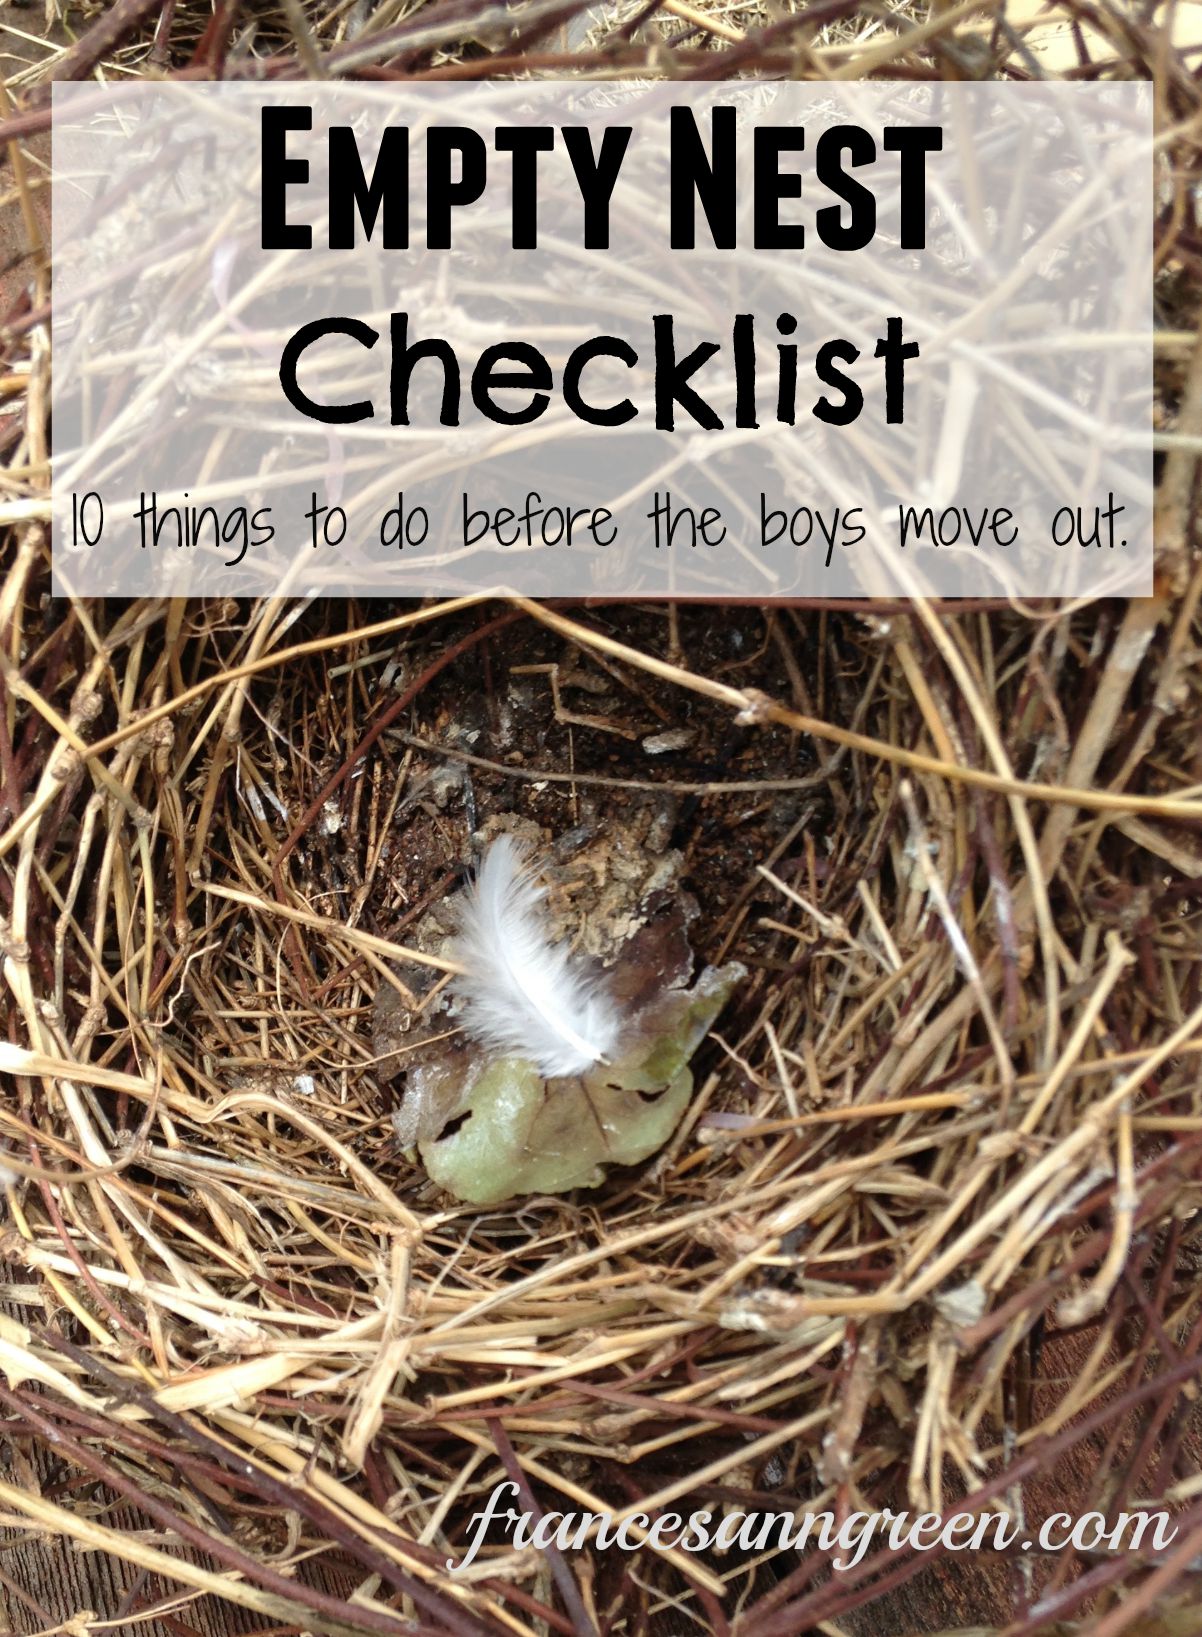 Checklist for the empty nest